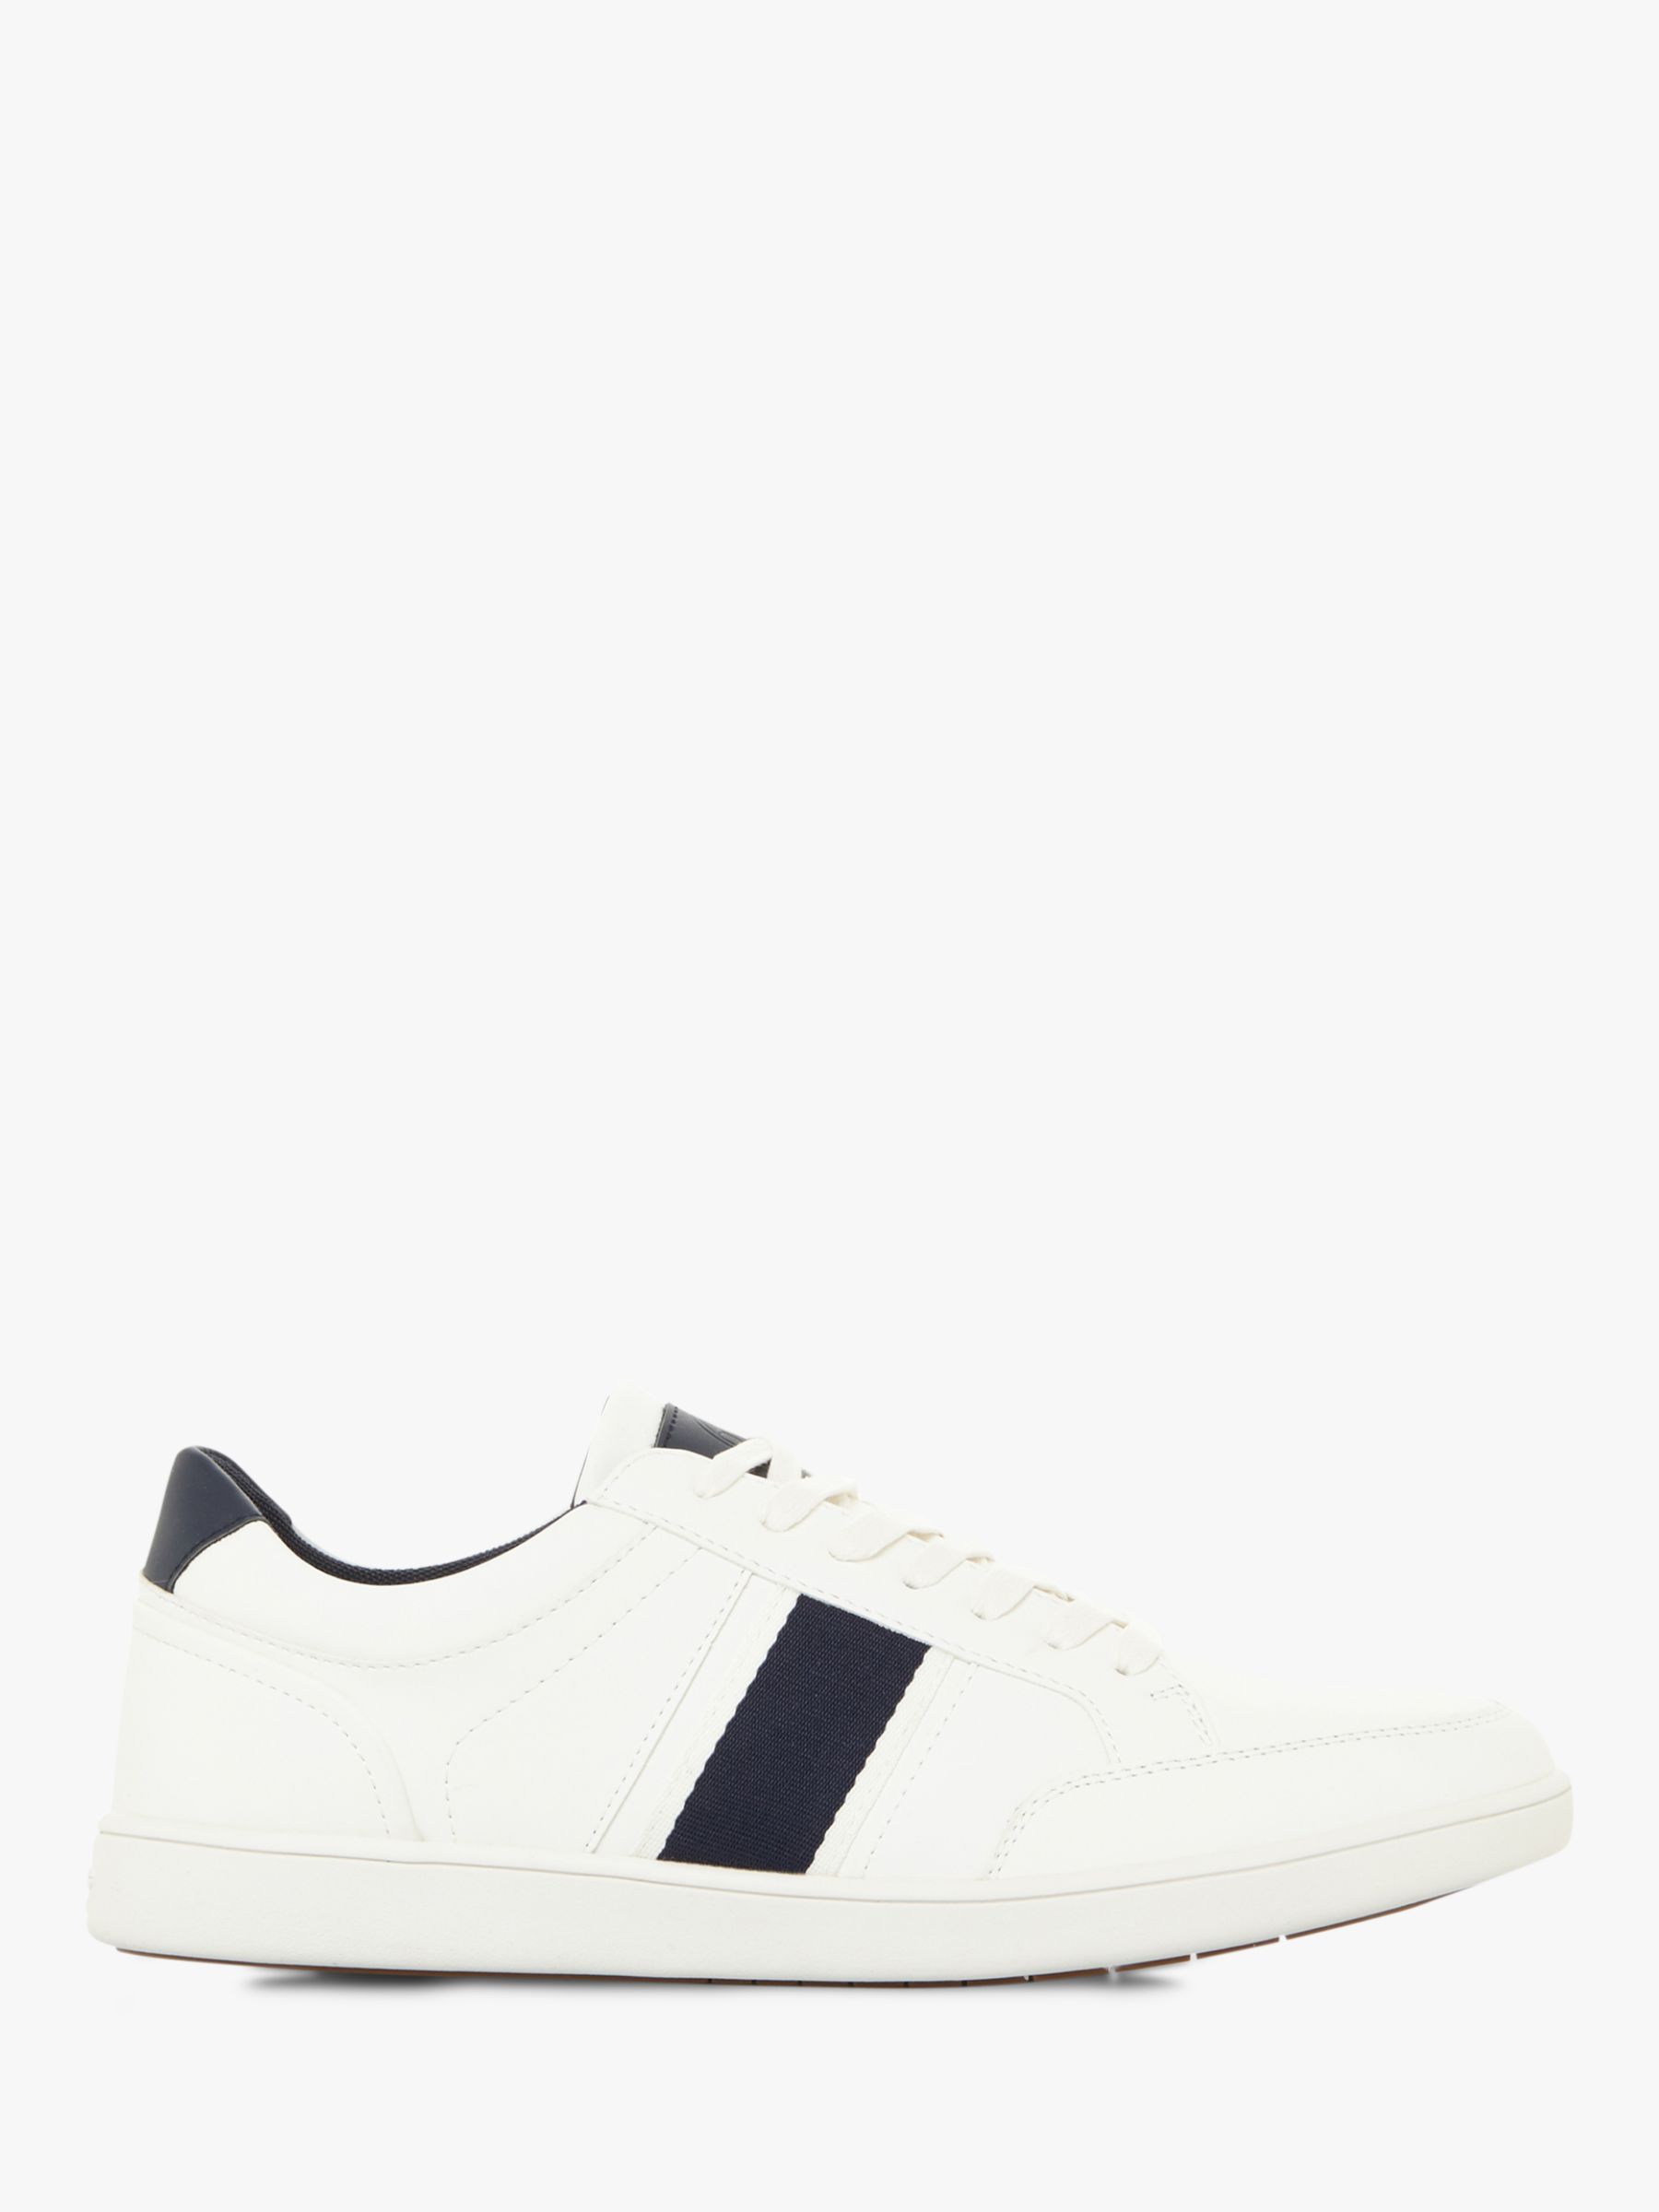 Dune Terry Contrast Stripe Trainers, White